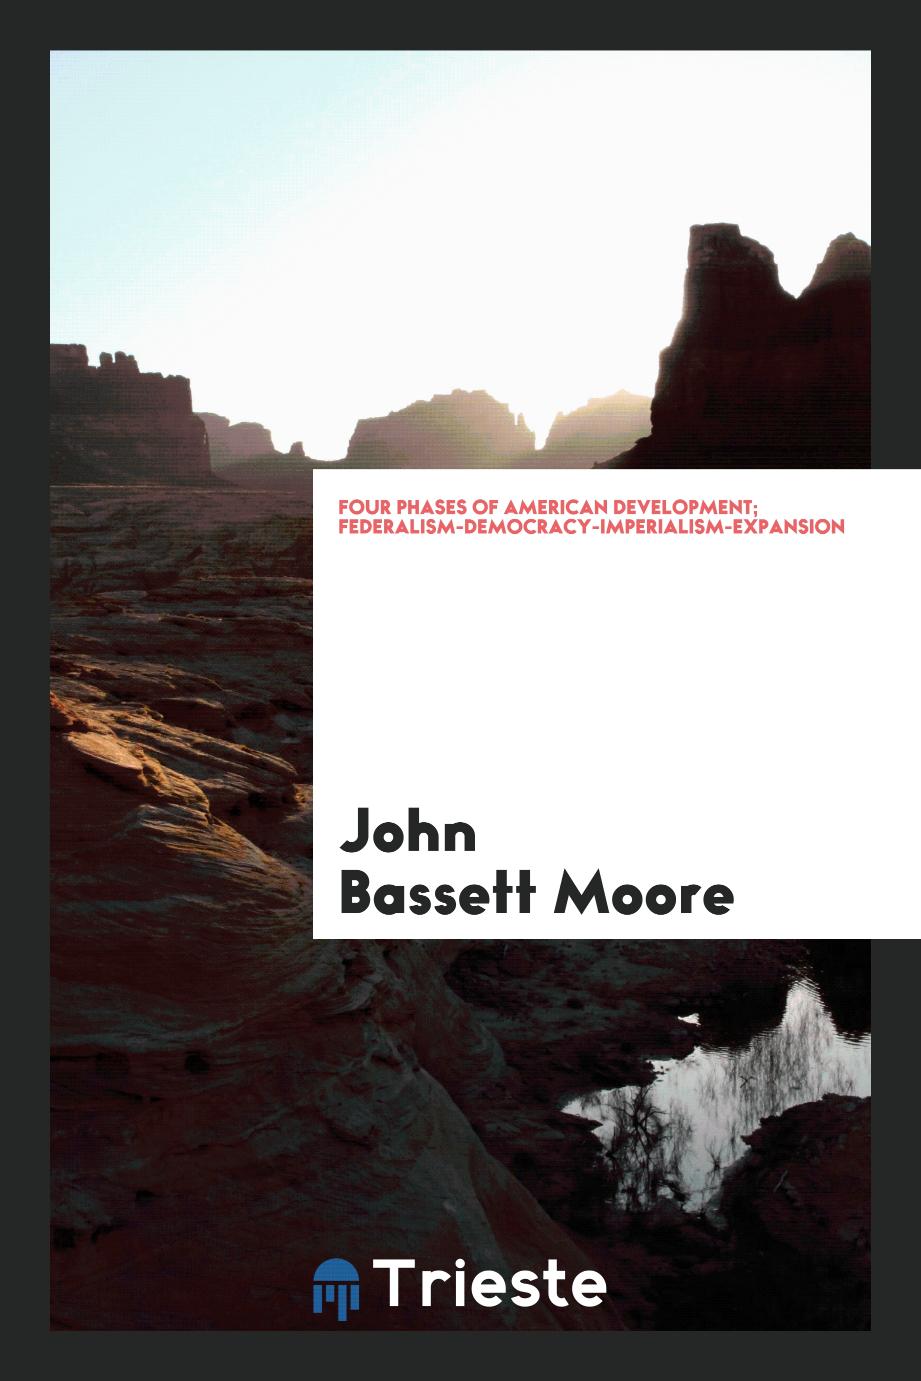 John Bassett Moore - Four phases of American development; federalism-democracy-imperialism-expansion